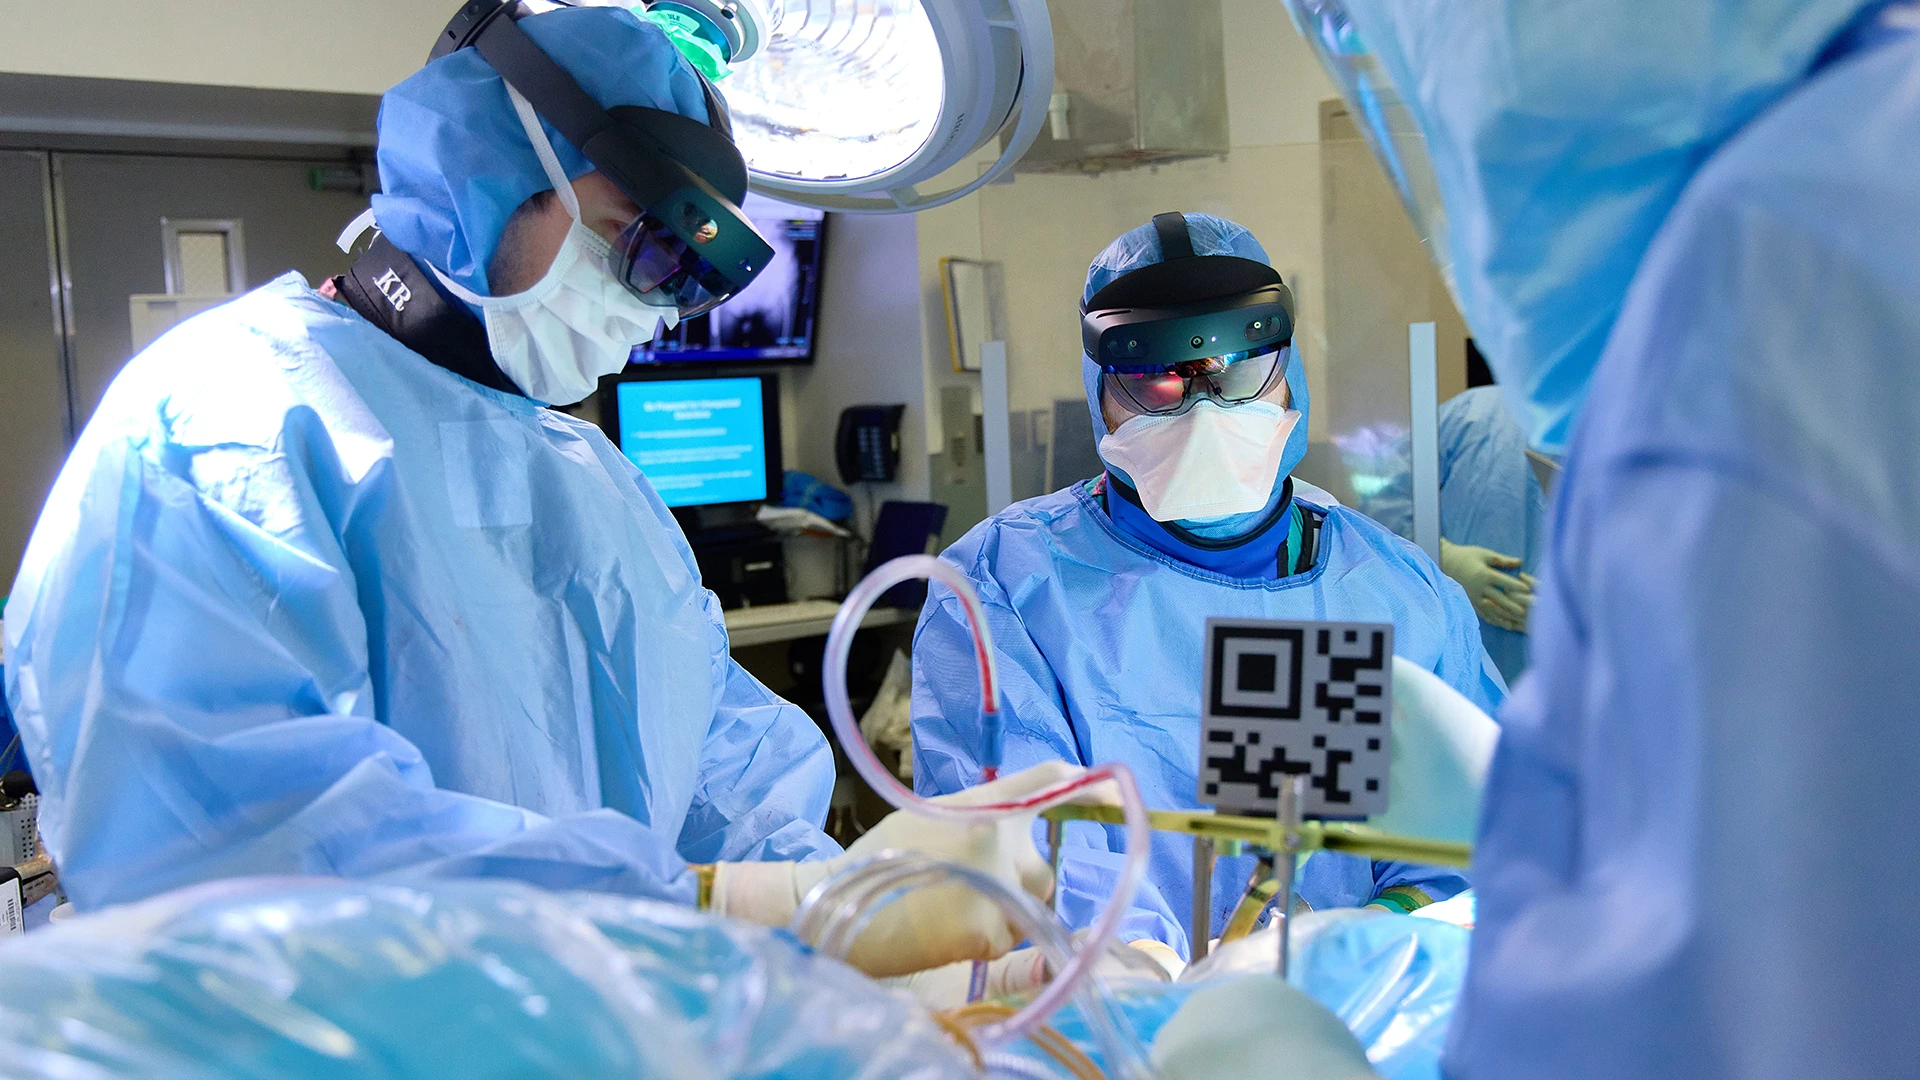 Dr. Hayden and team performing direct anterior total hip replacement with augmented reality glasses.